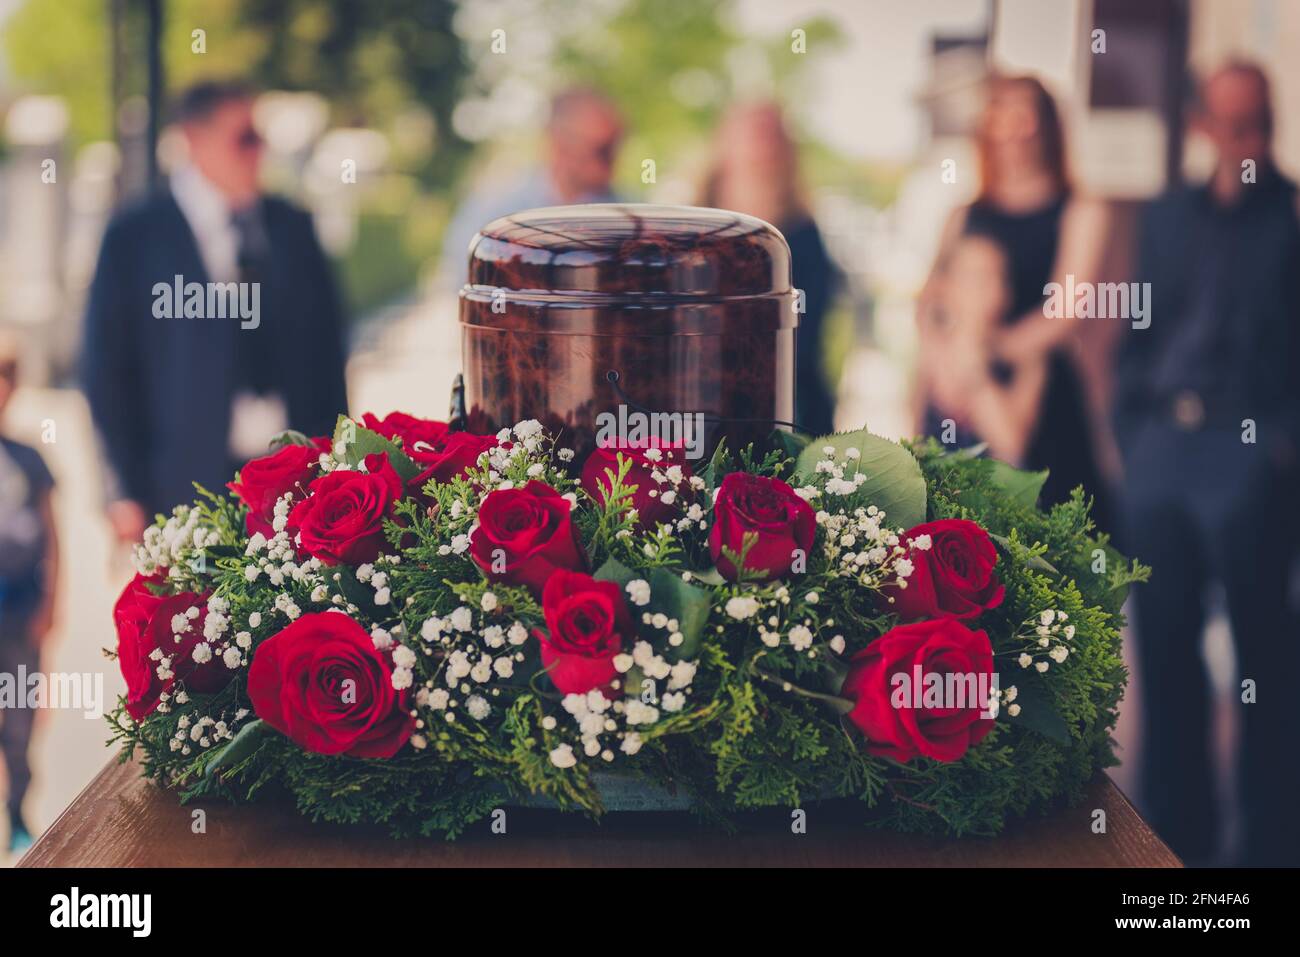 Funerary urn with ashes of dead and flowers at funeral. Burial urn decorated with flowers and people mourning in background at memorial service, sad a Stock Photo